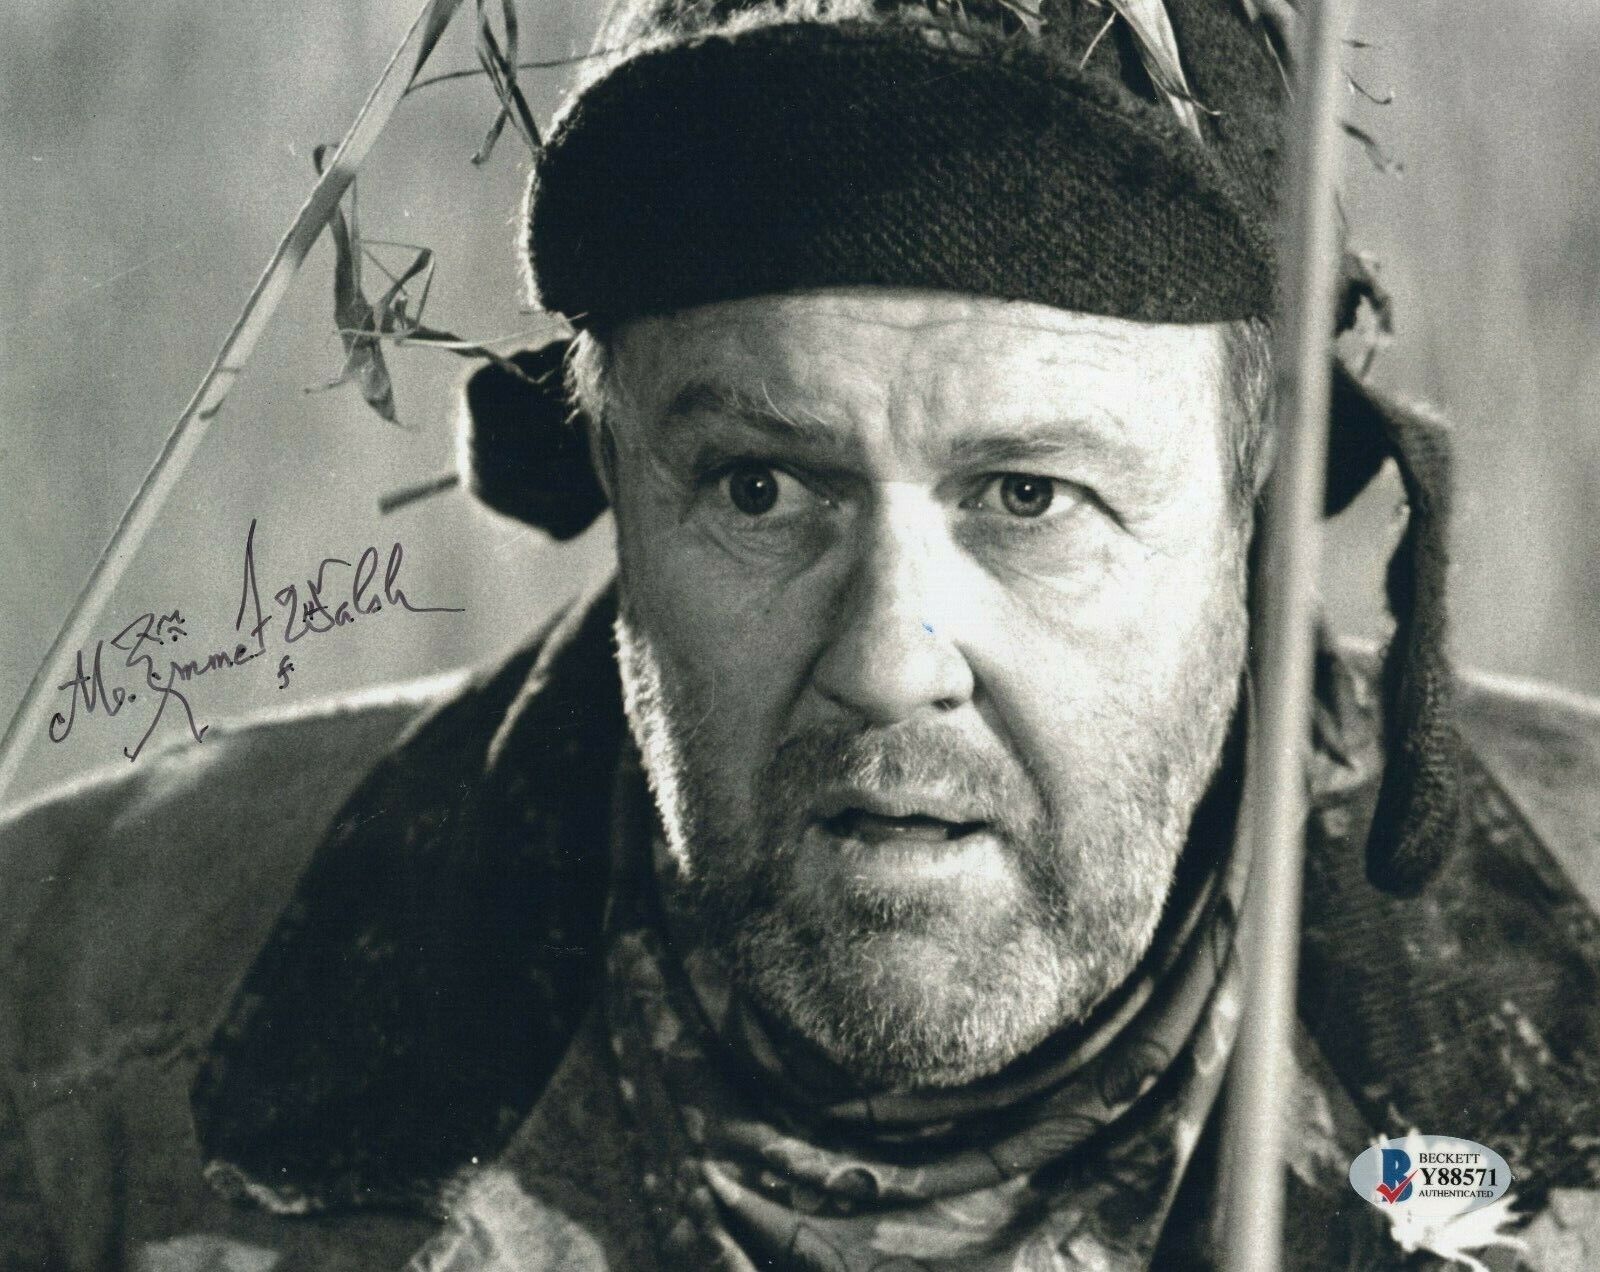 M. Emmet Walsh Signed Blade Runner Sneaky Pete 8x10 Photo Poster painting w/Beckett COA Y88571